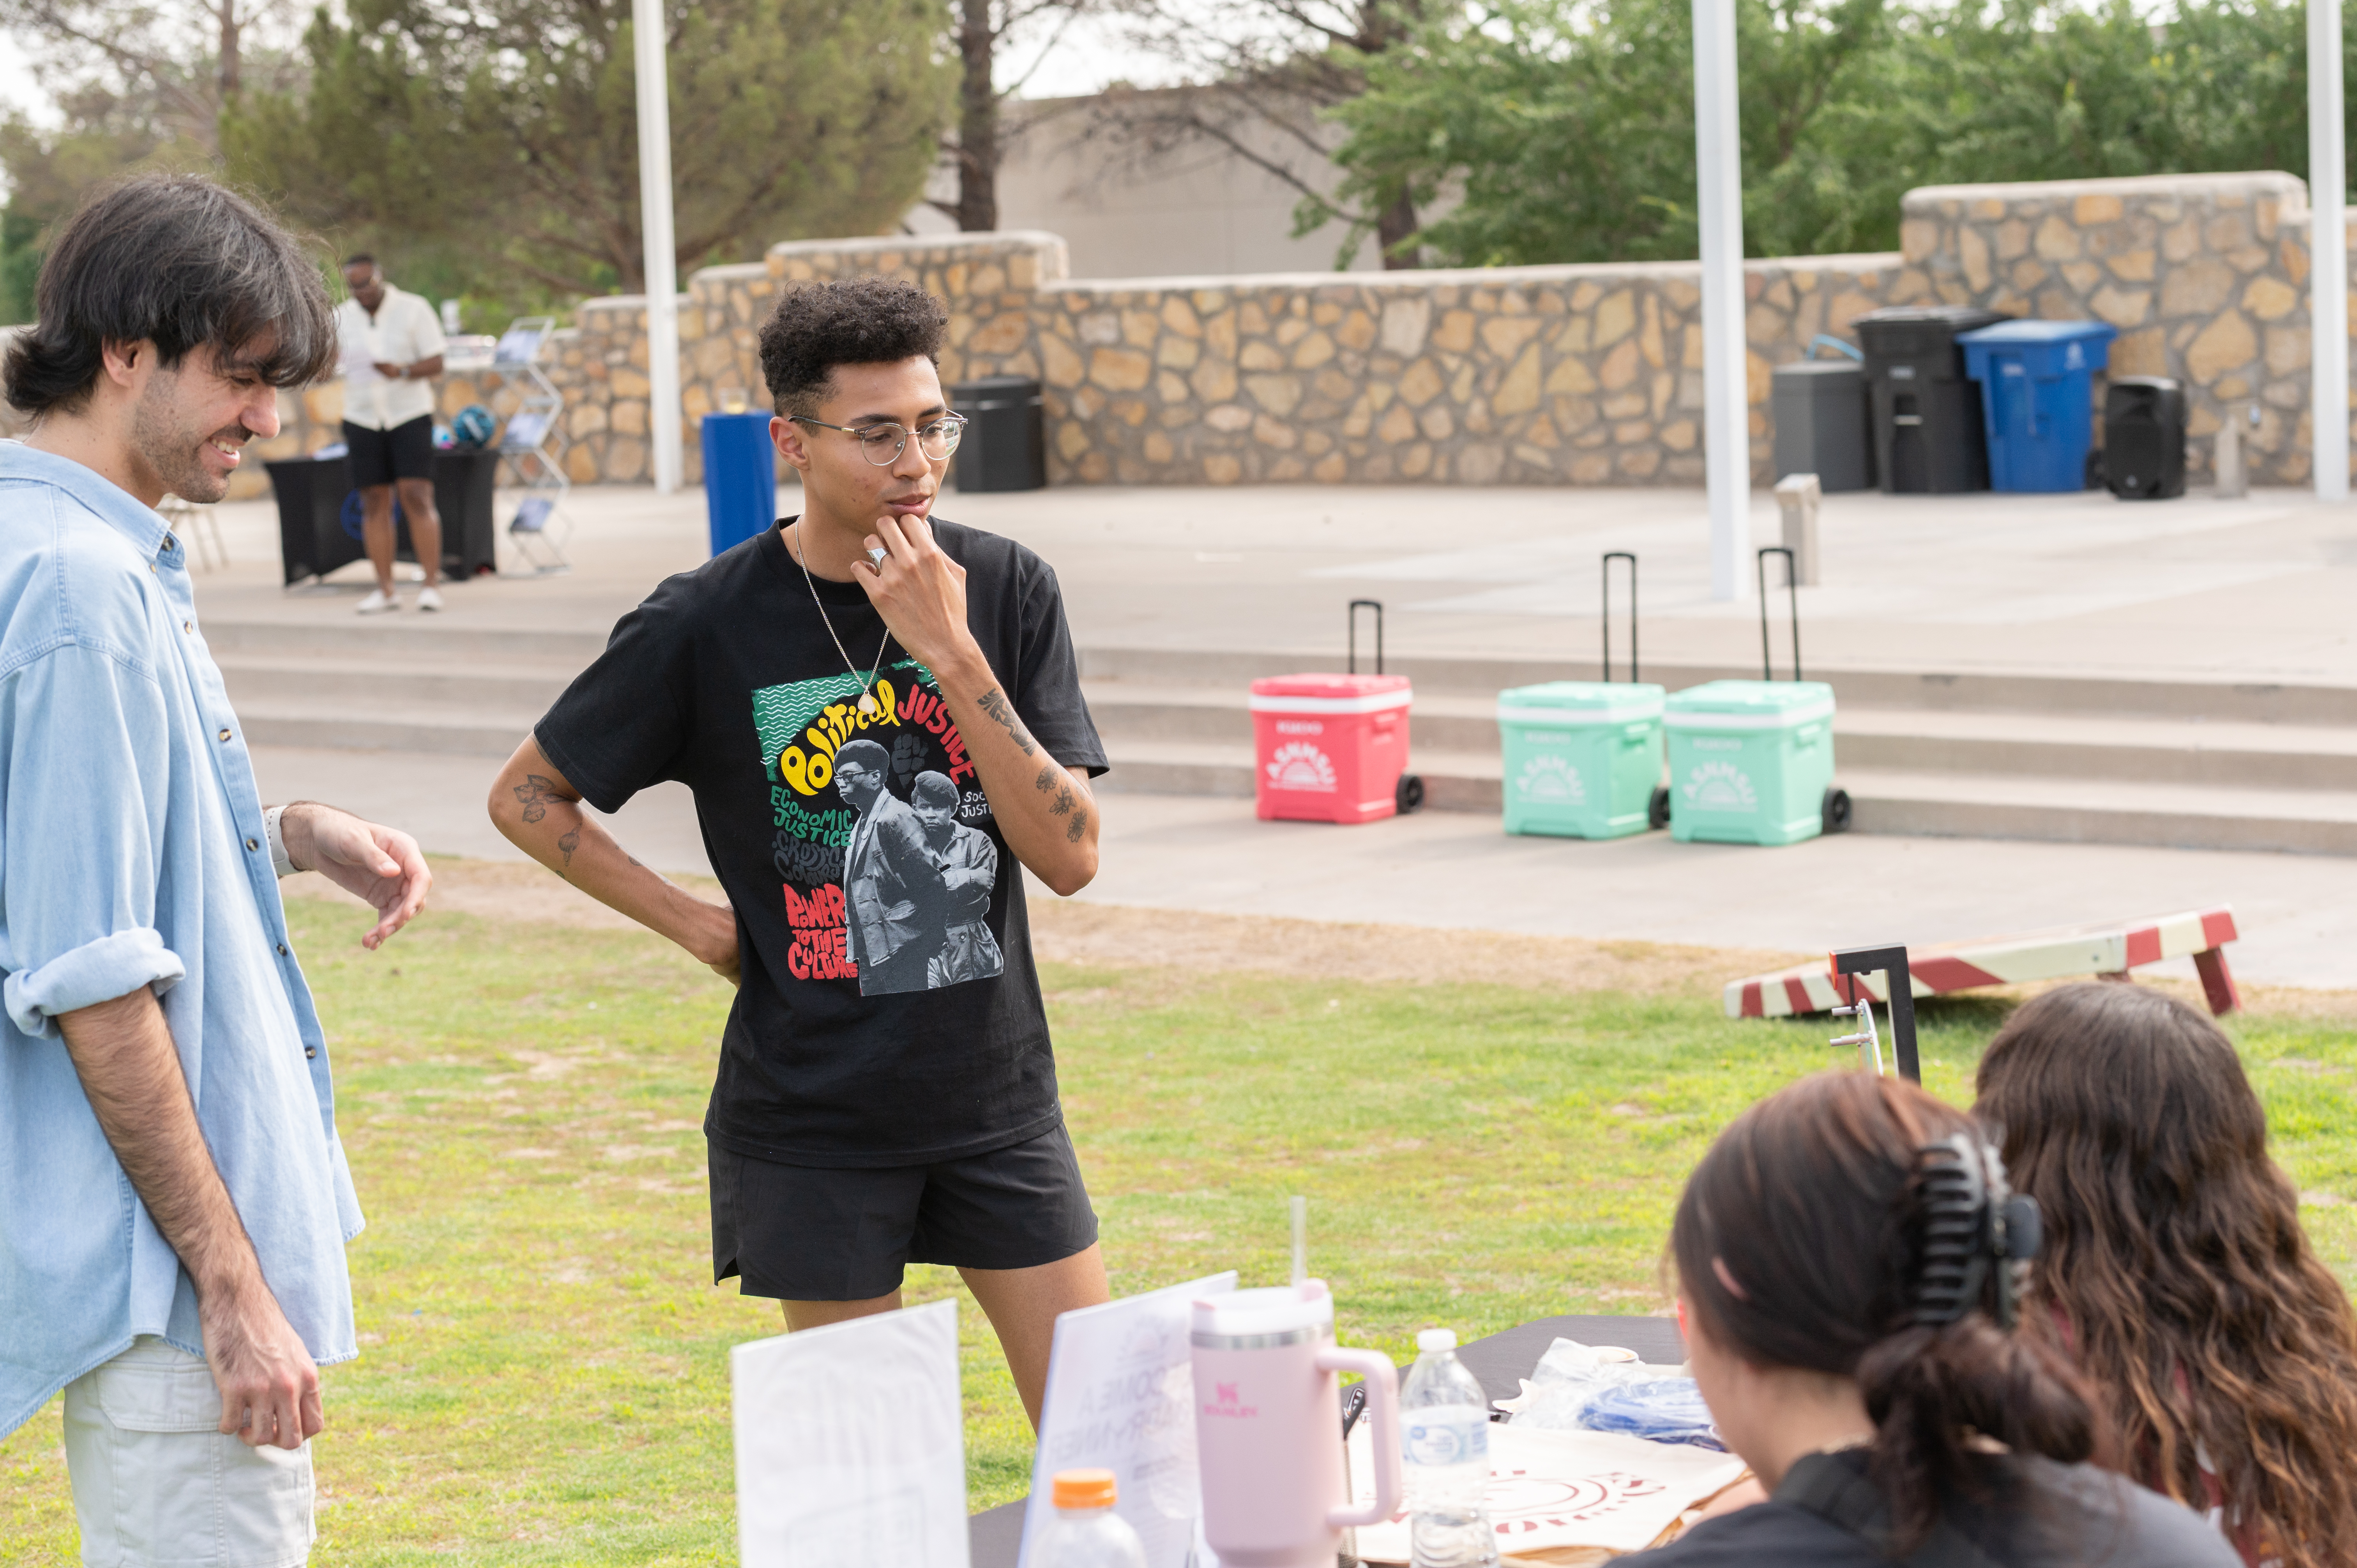 Picture from the celebration of Juneteenth, The image depicts an outdoor gathering with people interacting around a table set up on a grassy area. Two individuals, one in a light blue button-up shirt with rolled-up sleeves and the other in a black T-shirt and shorts printed with "Political Justice" and a graphic design, stand engaged in conversation in the foreground. They appear to be in a casual, friendly discussion. In the background, a stone wall is visible, along with a few blue, red, and turquoise wheeled coolers staged on a concrete platform beside some recycling bins and trash cans. In the lower right corner, the back of a third participant’s head, who has dark hair tied back and headphones around their neck, is seen. A fourth person with long, wavy hair is partially visible, facing the two standing individuals. The setting appears to be a campus or community event with a relaxed and open atmosphere.